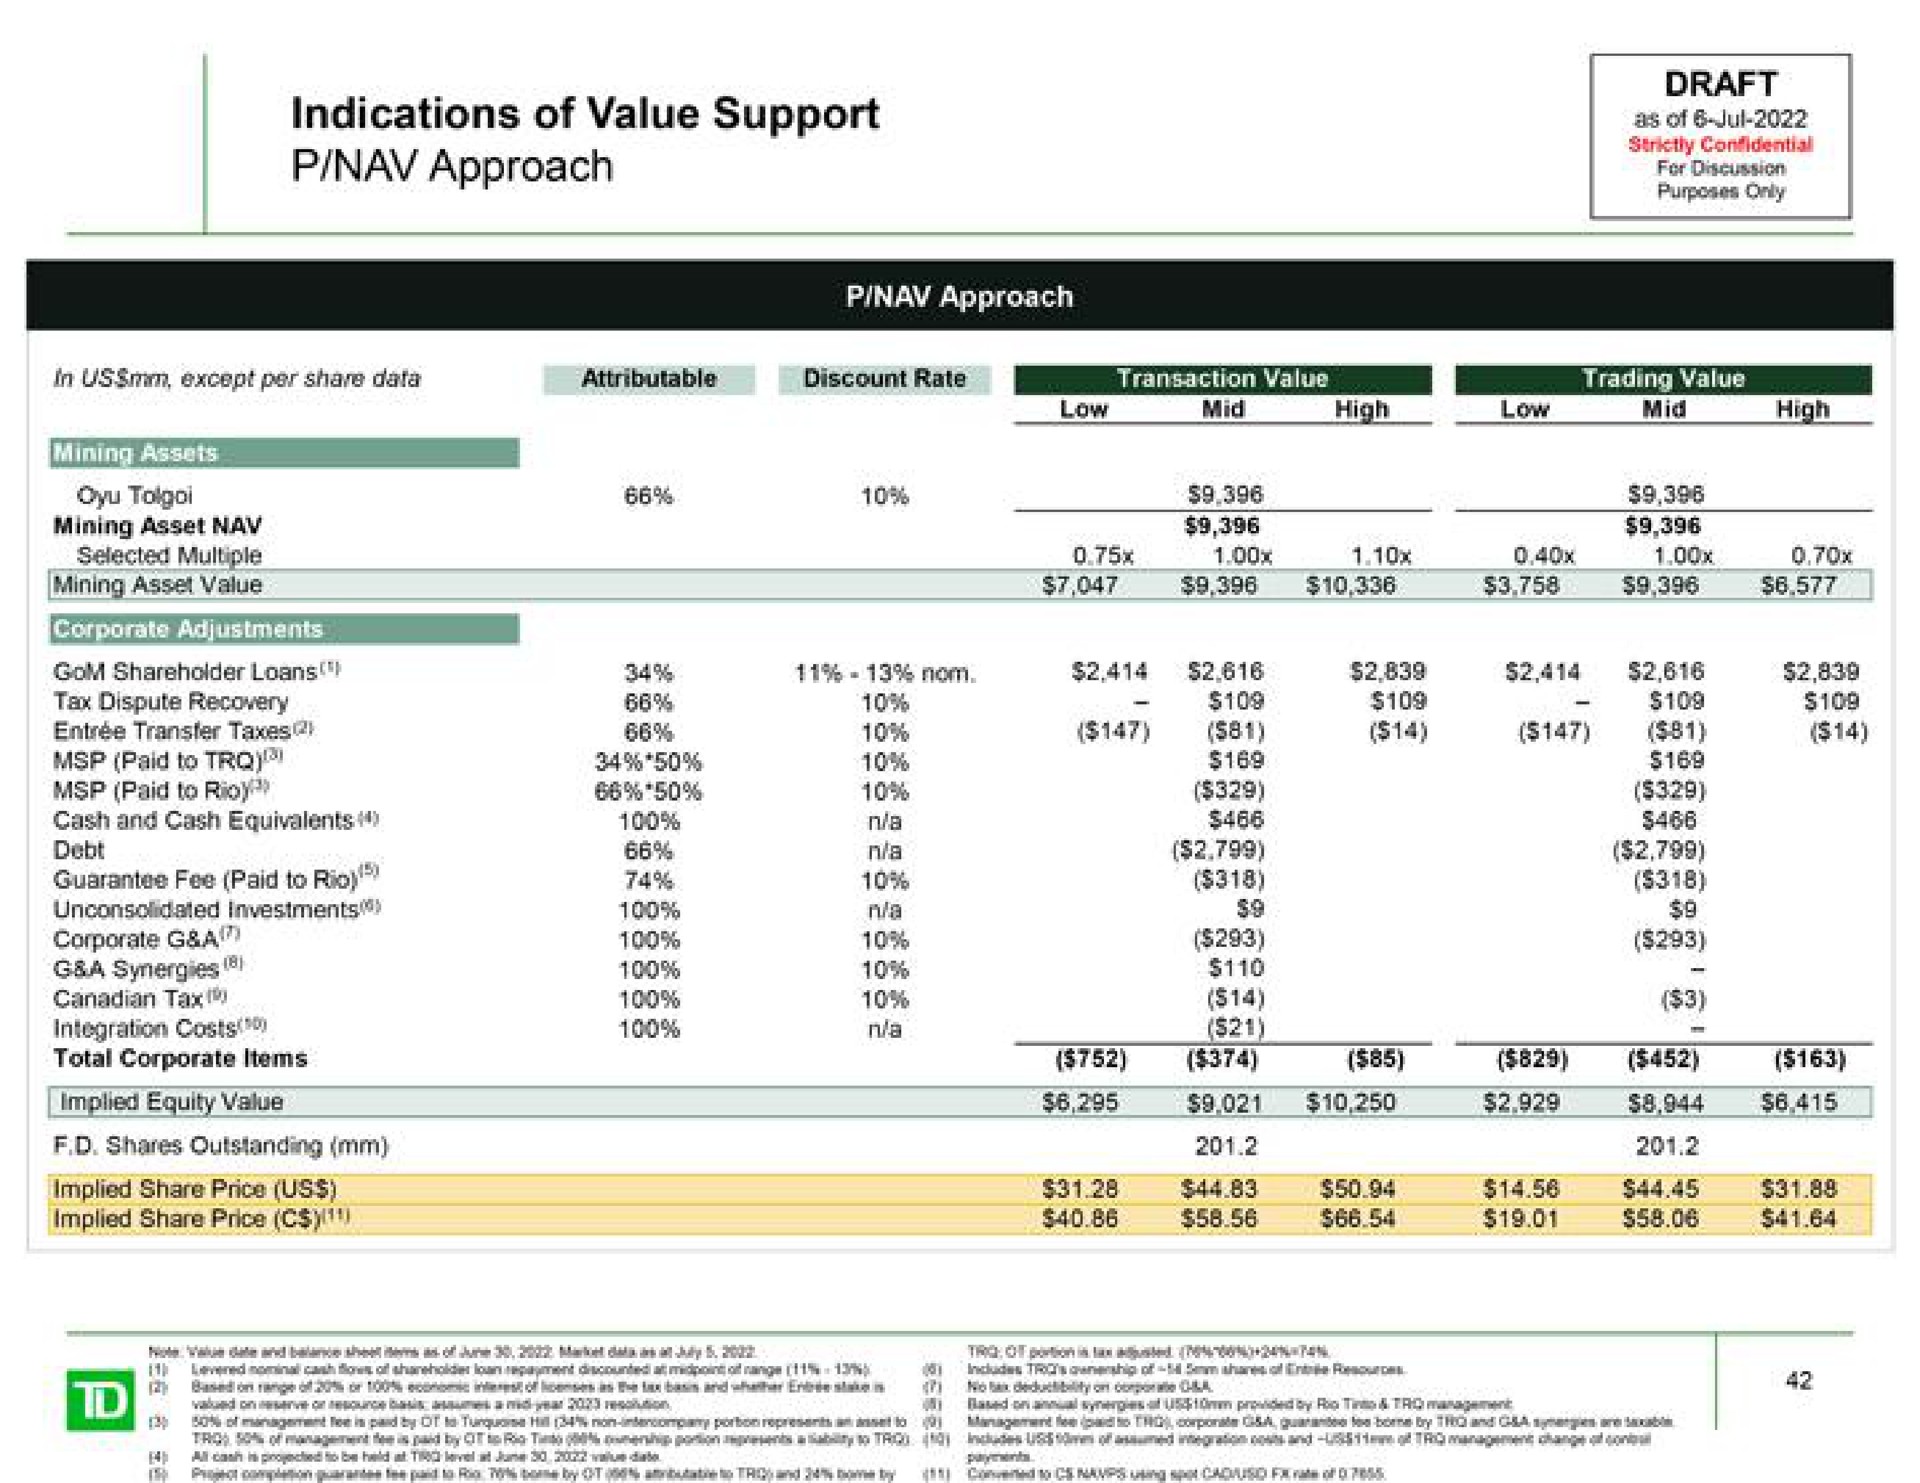 indications of value support approach selected multiple debt implied equity value implied share price us implied share price | TD Securities